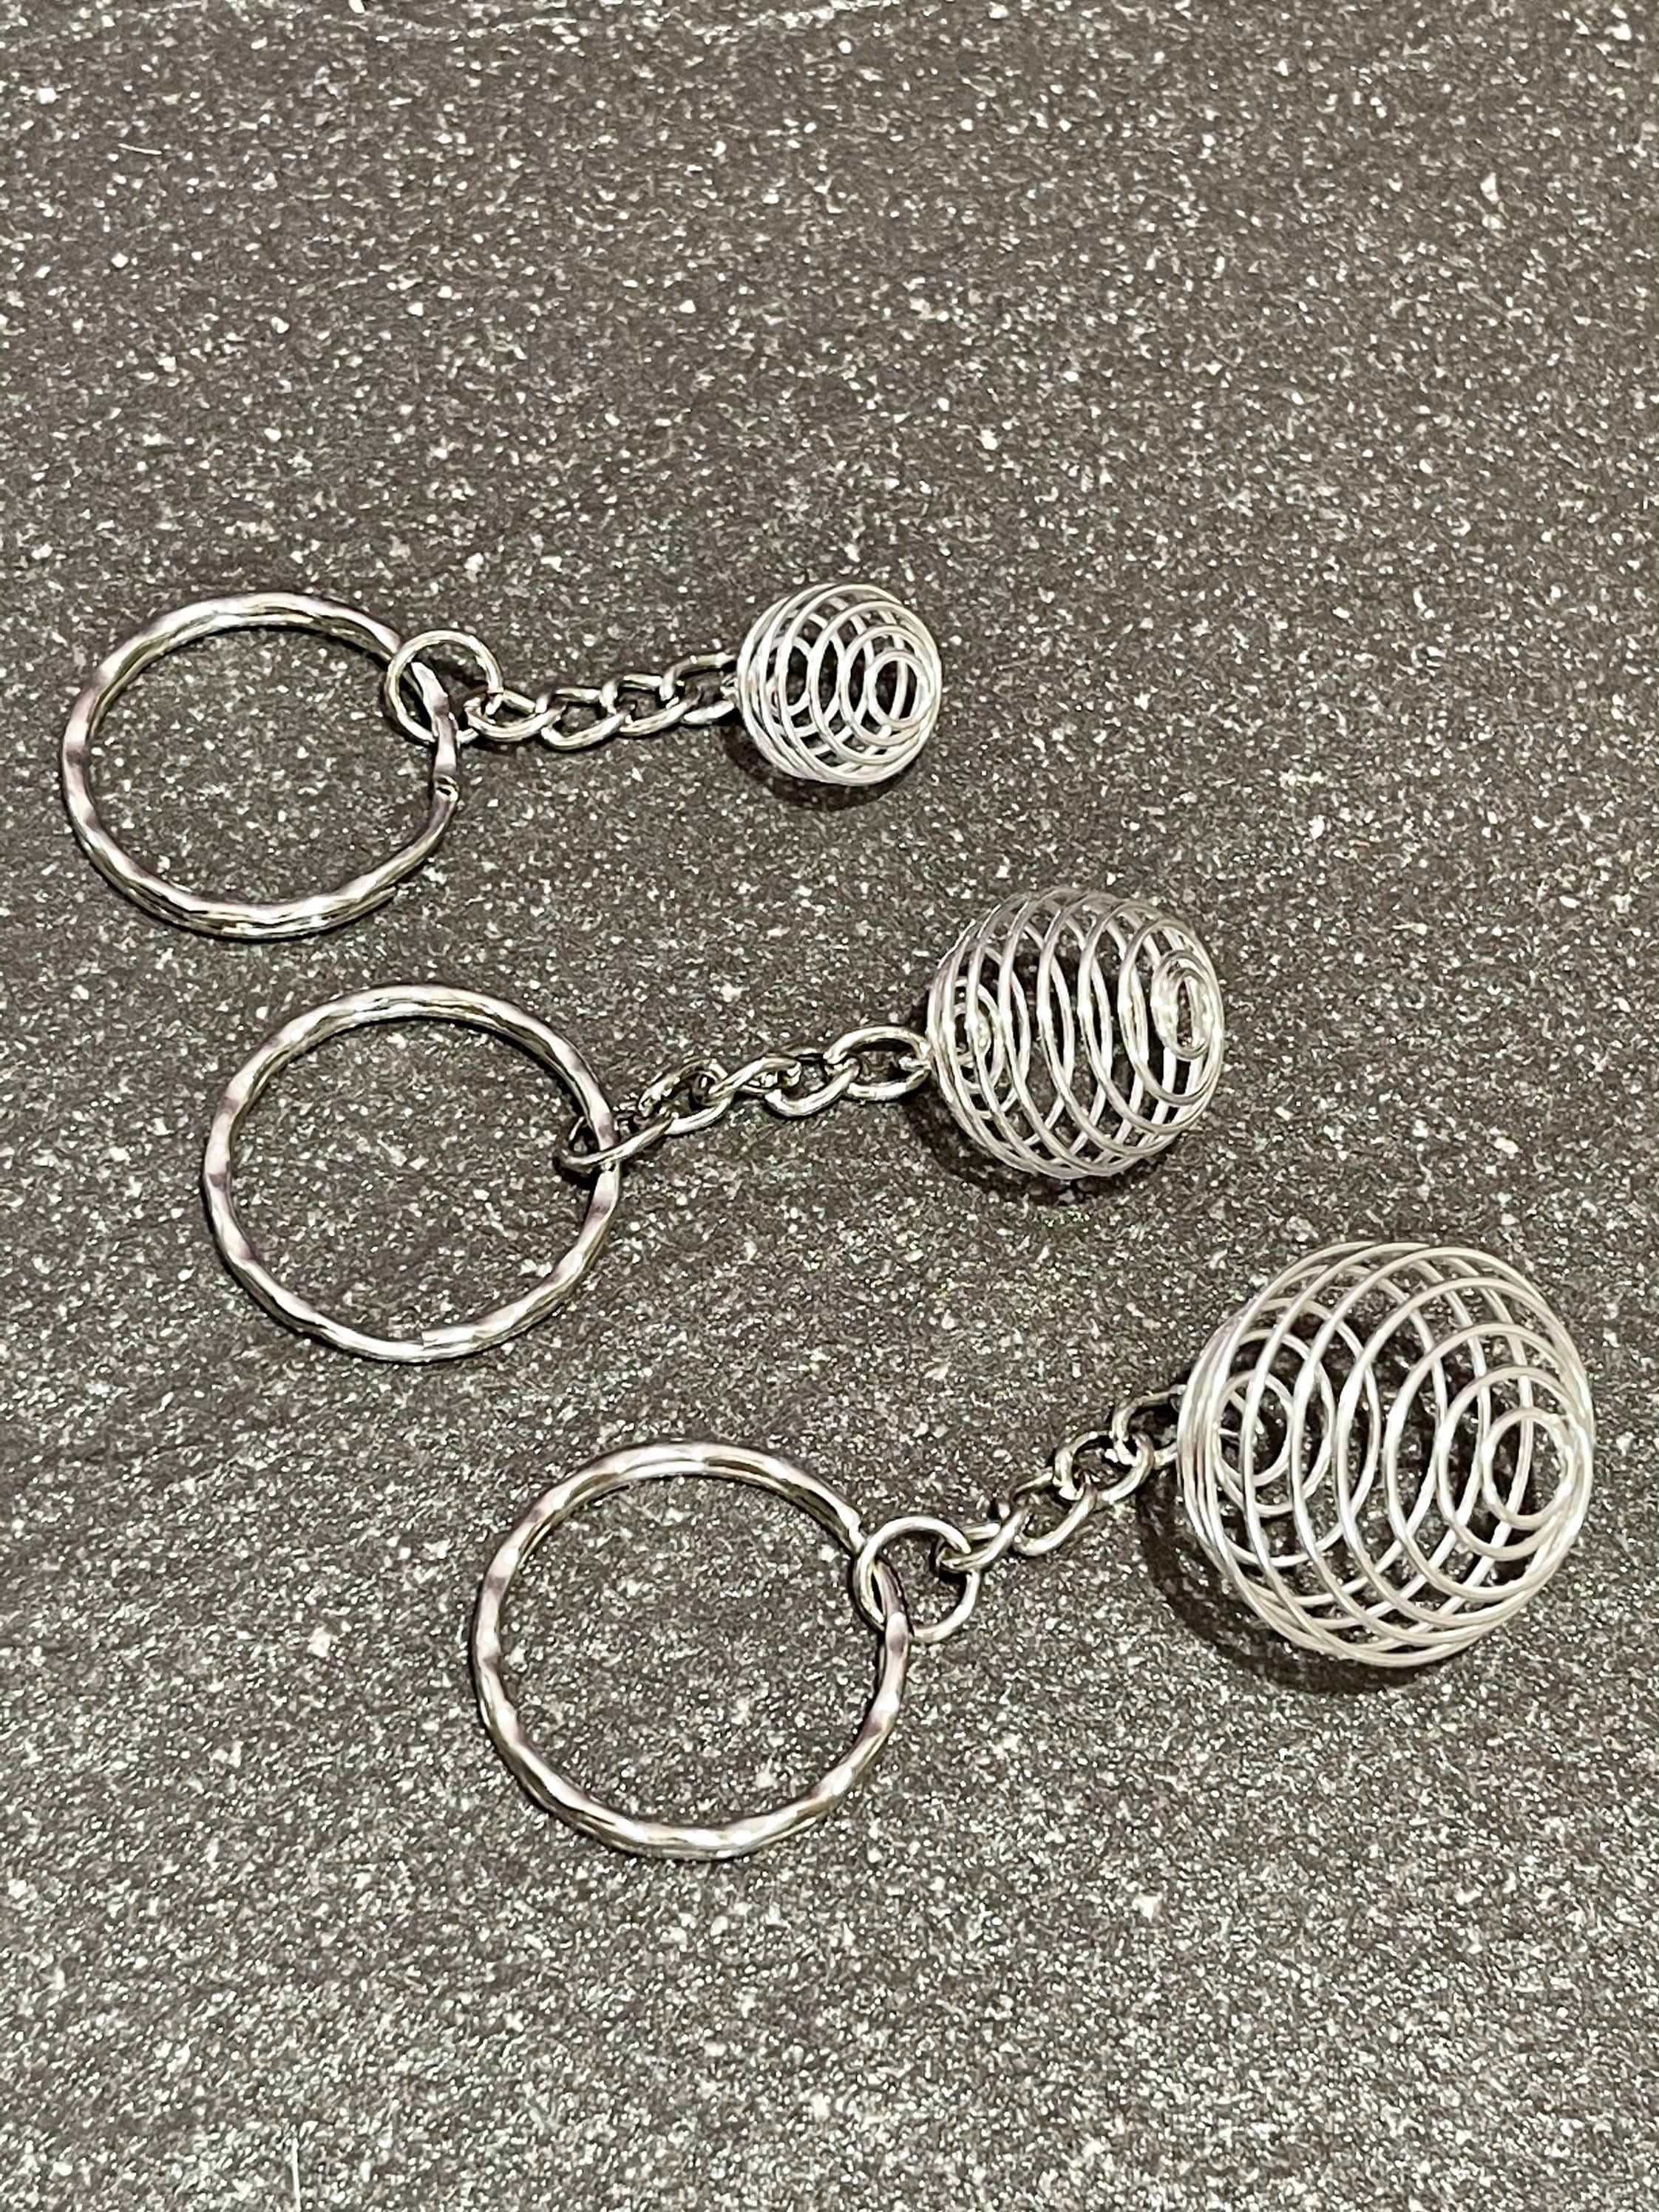 Empty Silver Plated Spiral Cage Pendant Necklace - 15mm 20mm or 25mm - Bulk Quantity 1 3 or 5 Tumble Stone Crystal Holder Gemstone Pendulum